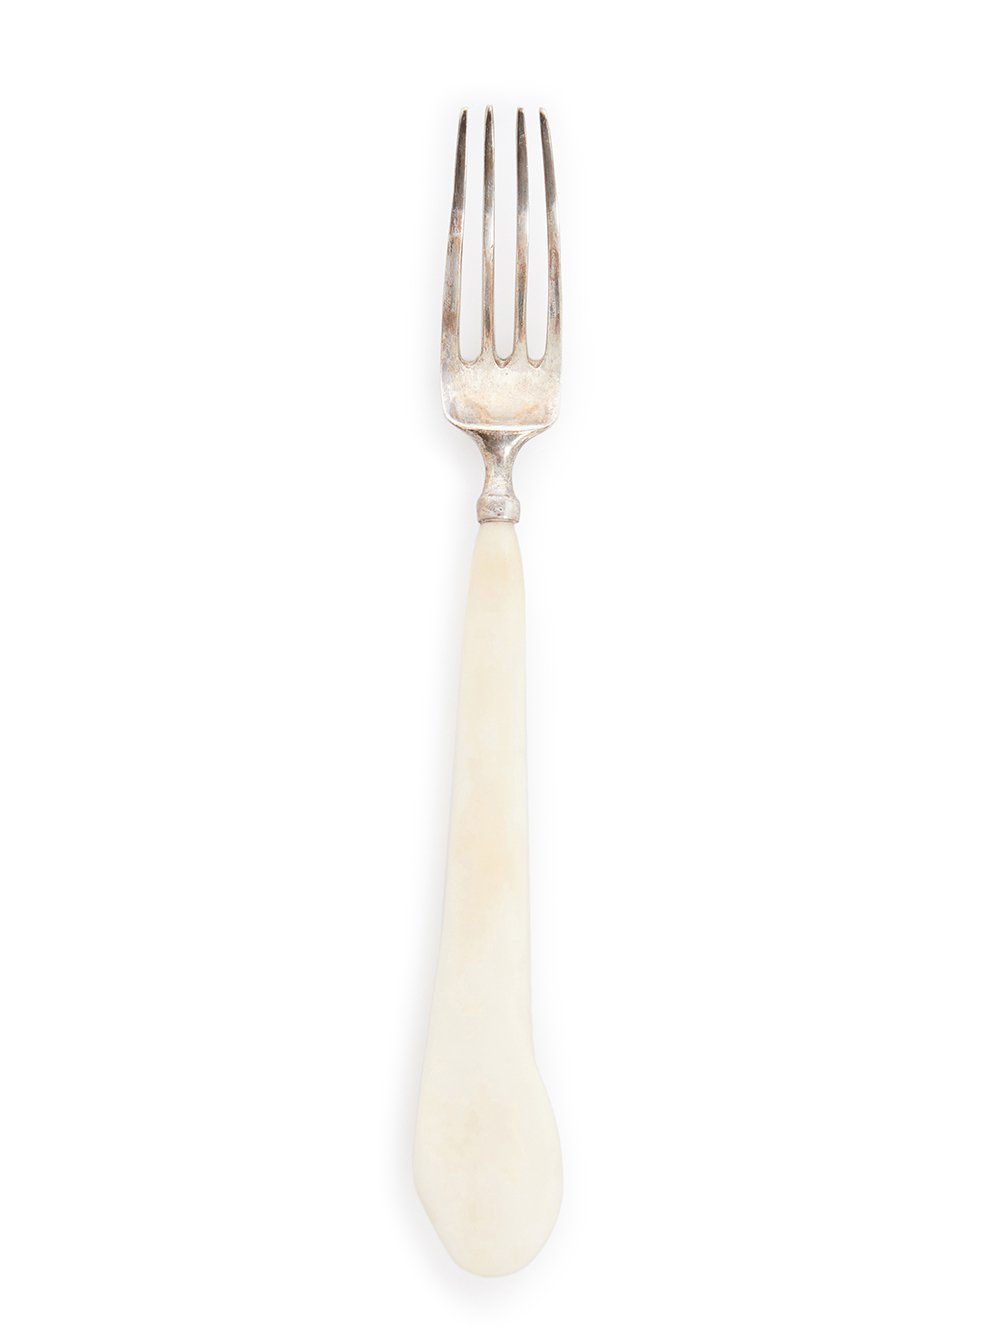 RICK OWENS FORK FEATURES A FOUR TINE STERLING TOP AND A NATURAL COLOR BONE HANDLE.